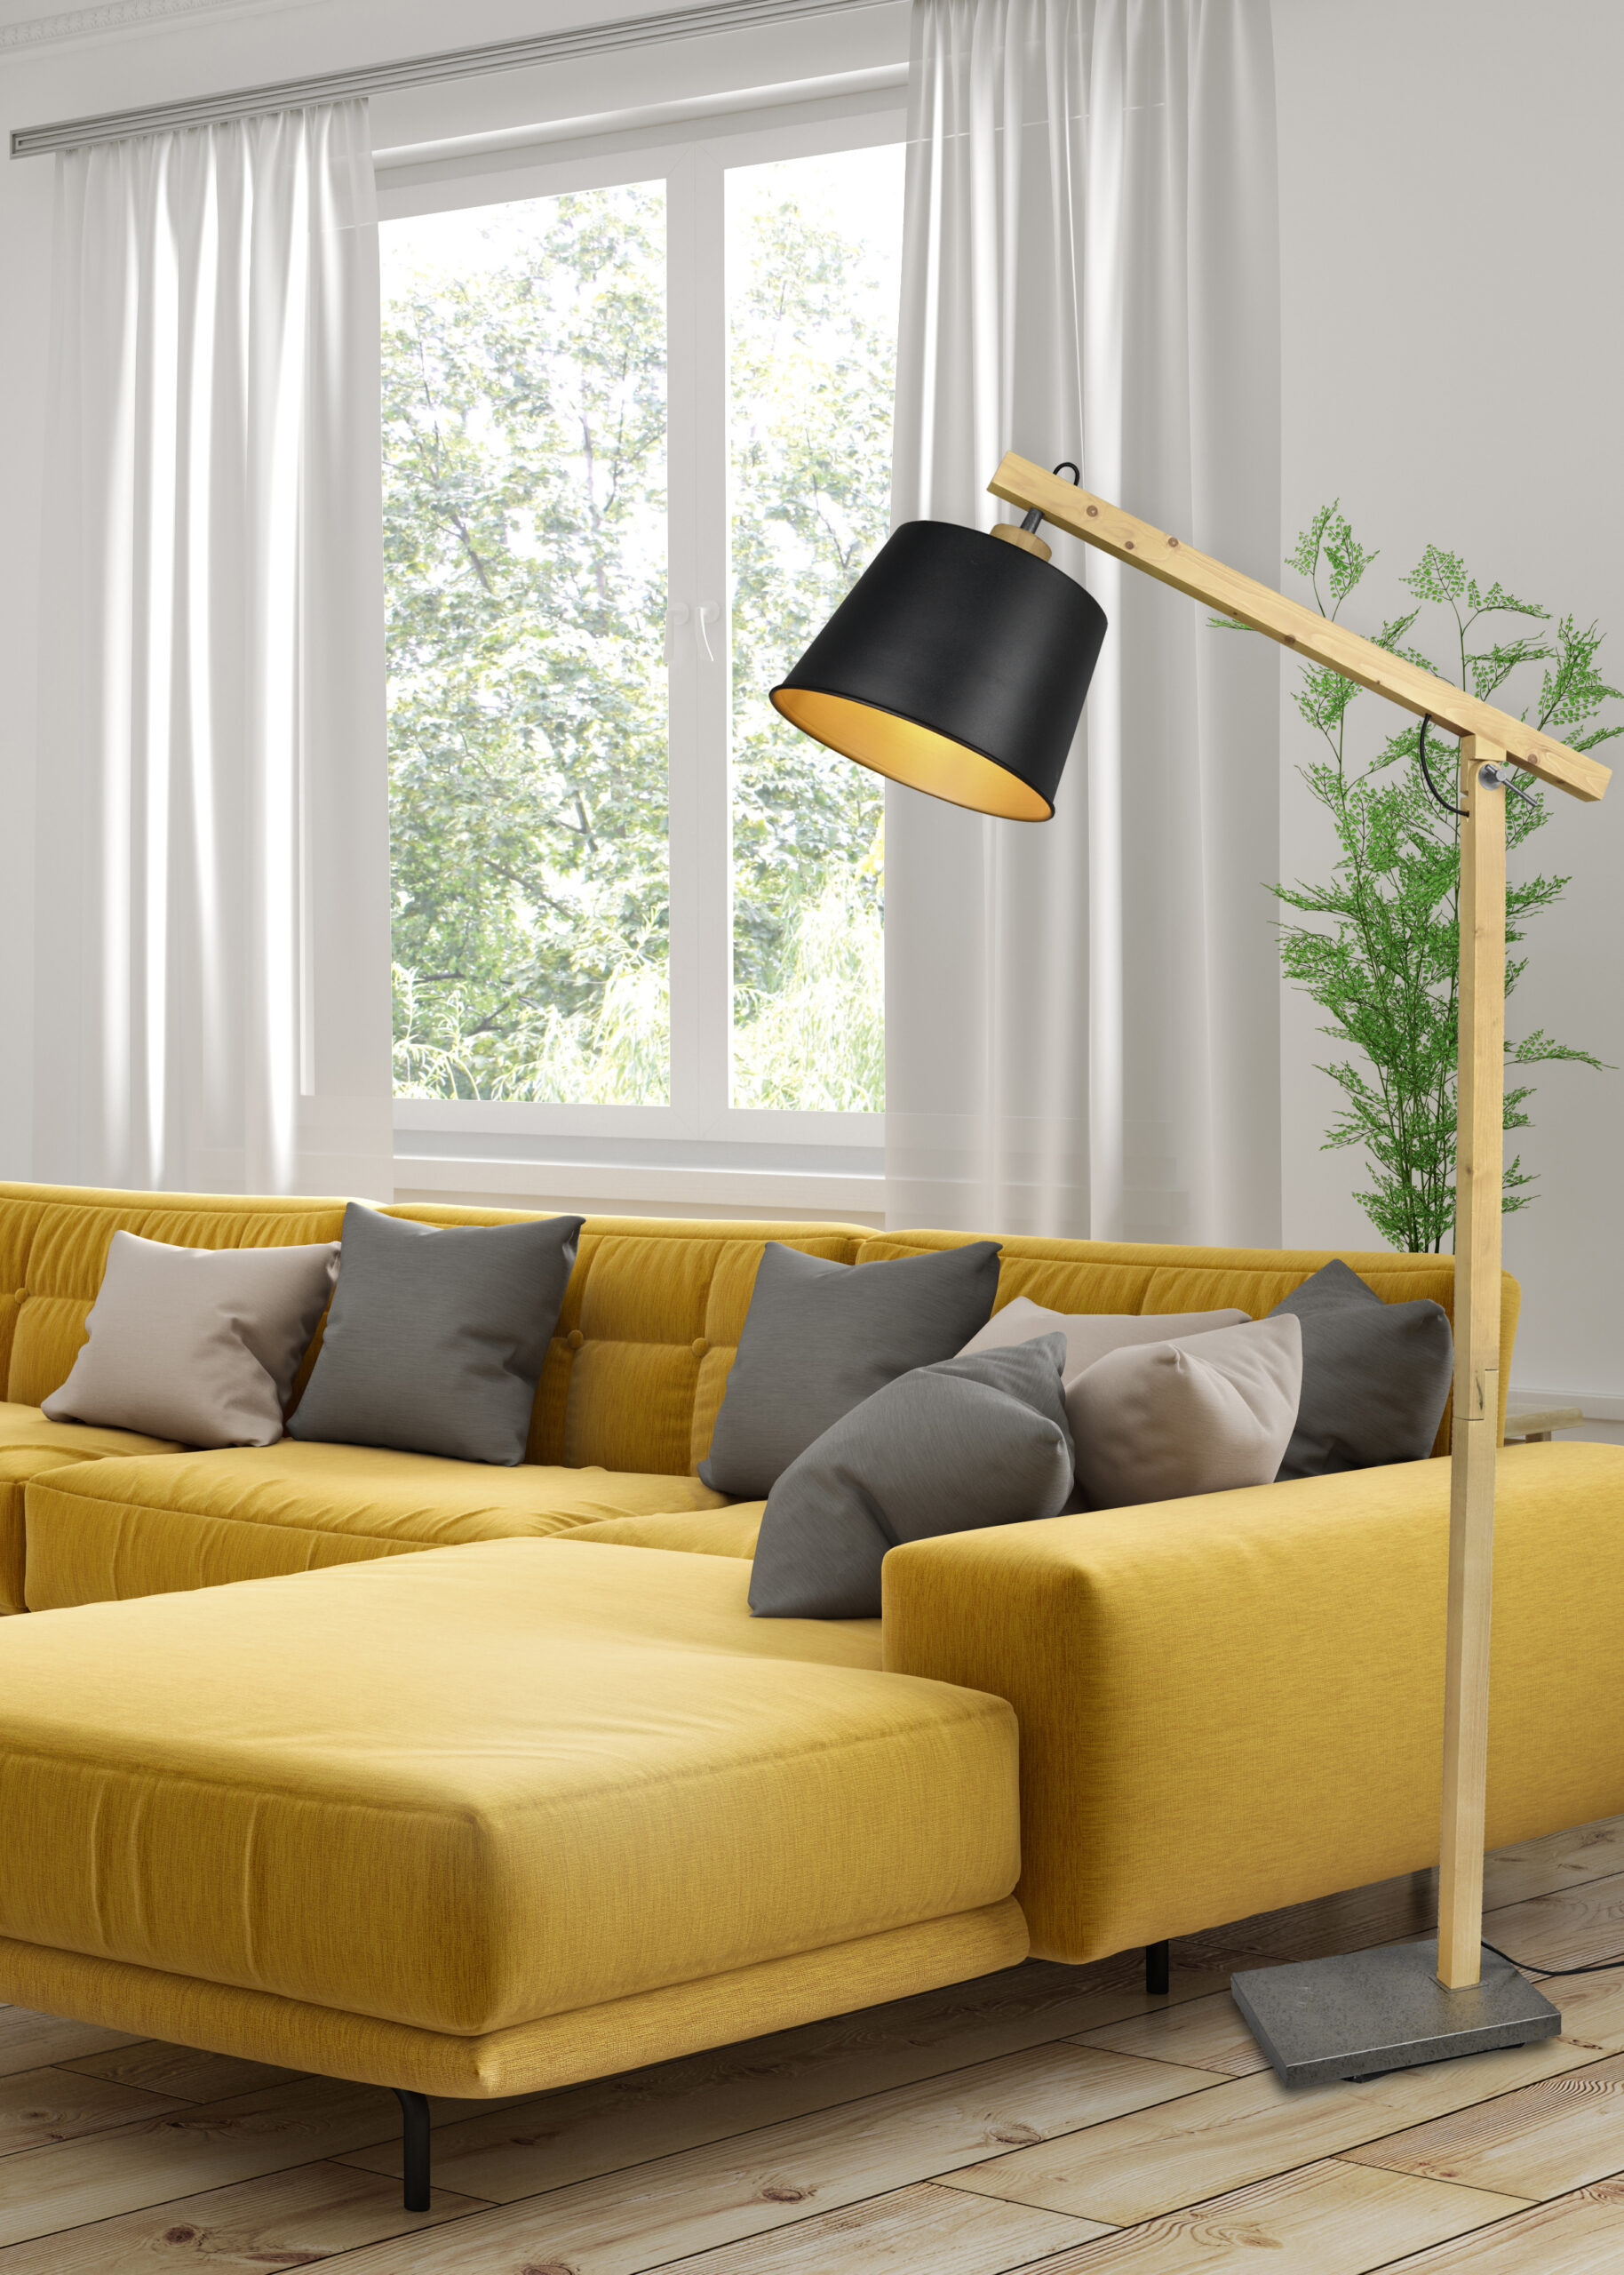 Modern interior design of scandinavian apartment, living room with yellow sofa, sideboard and black armchair 3d rendering